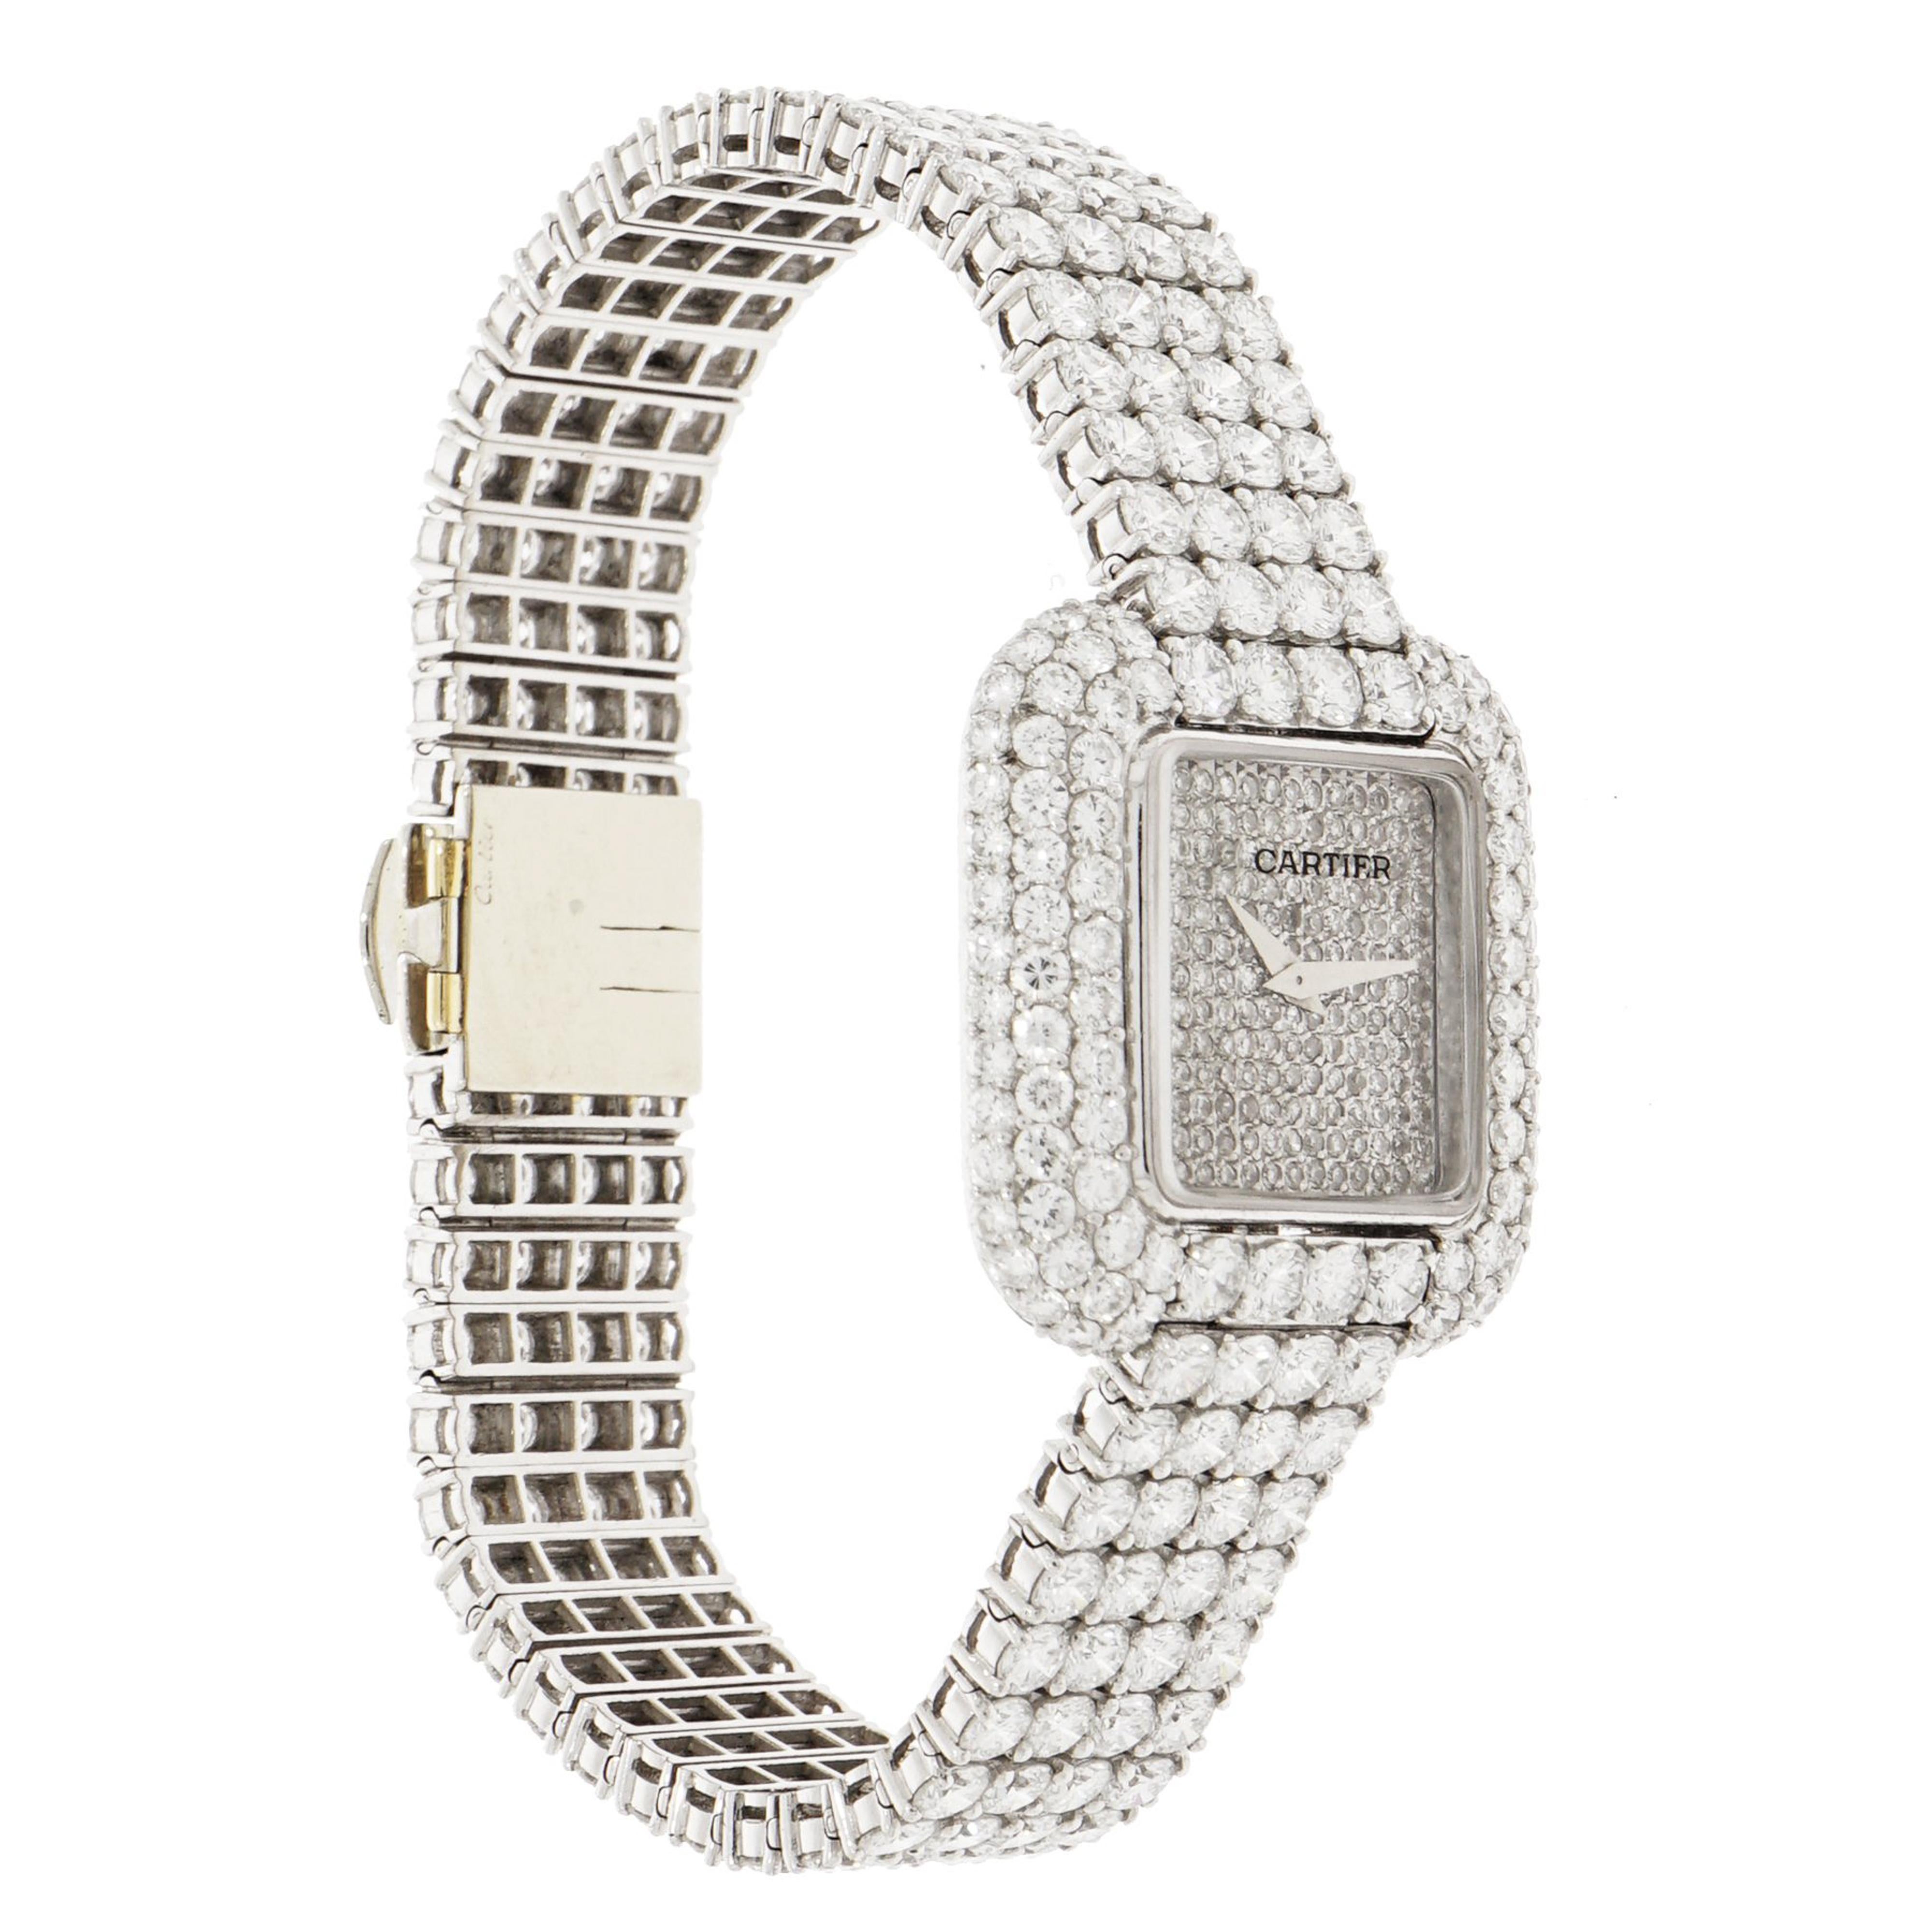 Magnificent  Cartier watch with four rows of diamonds on the bracelet. The dial is hand crafted and set in 18k white gold. This timepiece features a manually wound movement by Vacheron Constantin with indications for the Hours and Minutes.  The case